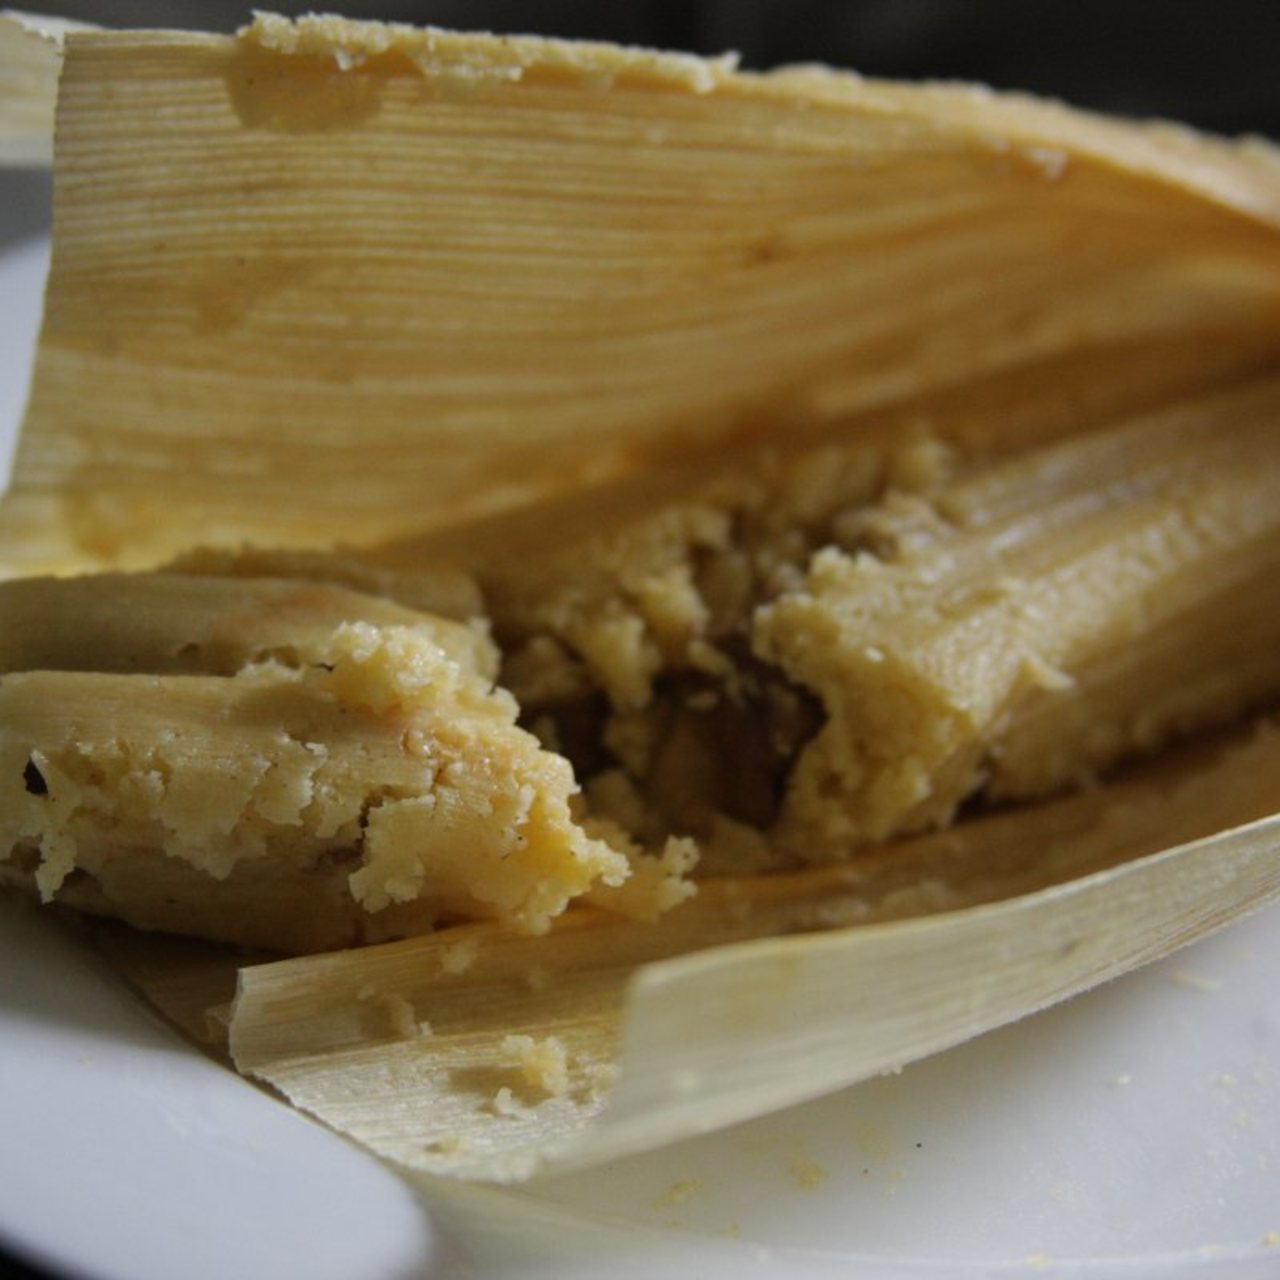 How Many Tamales Fit In A 40 Quart Steamer